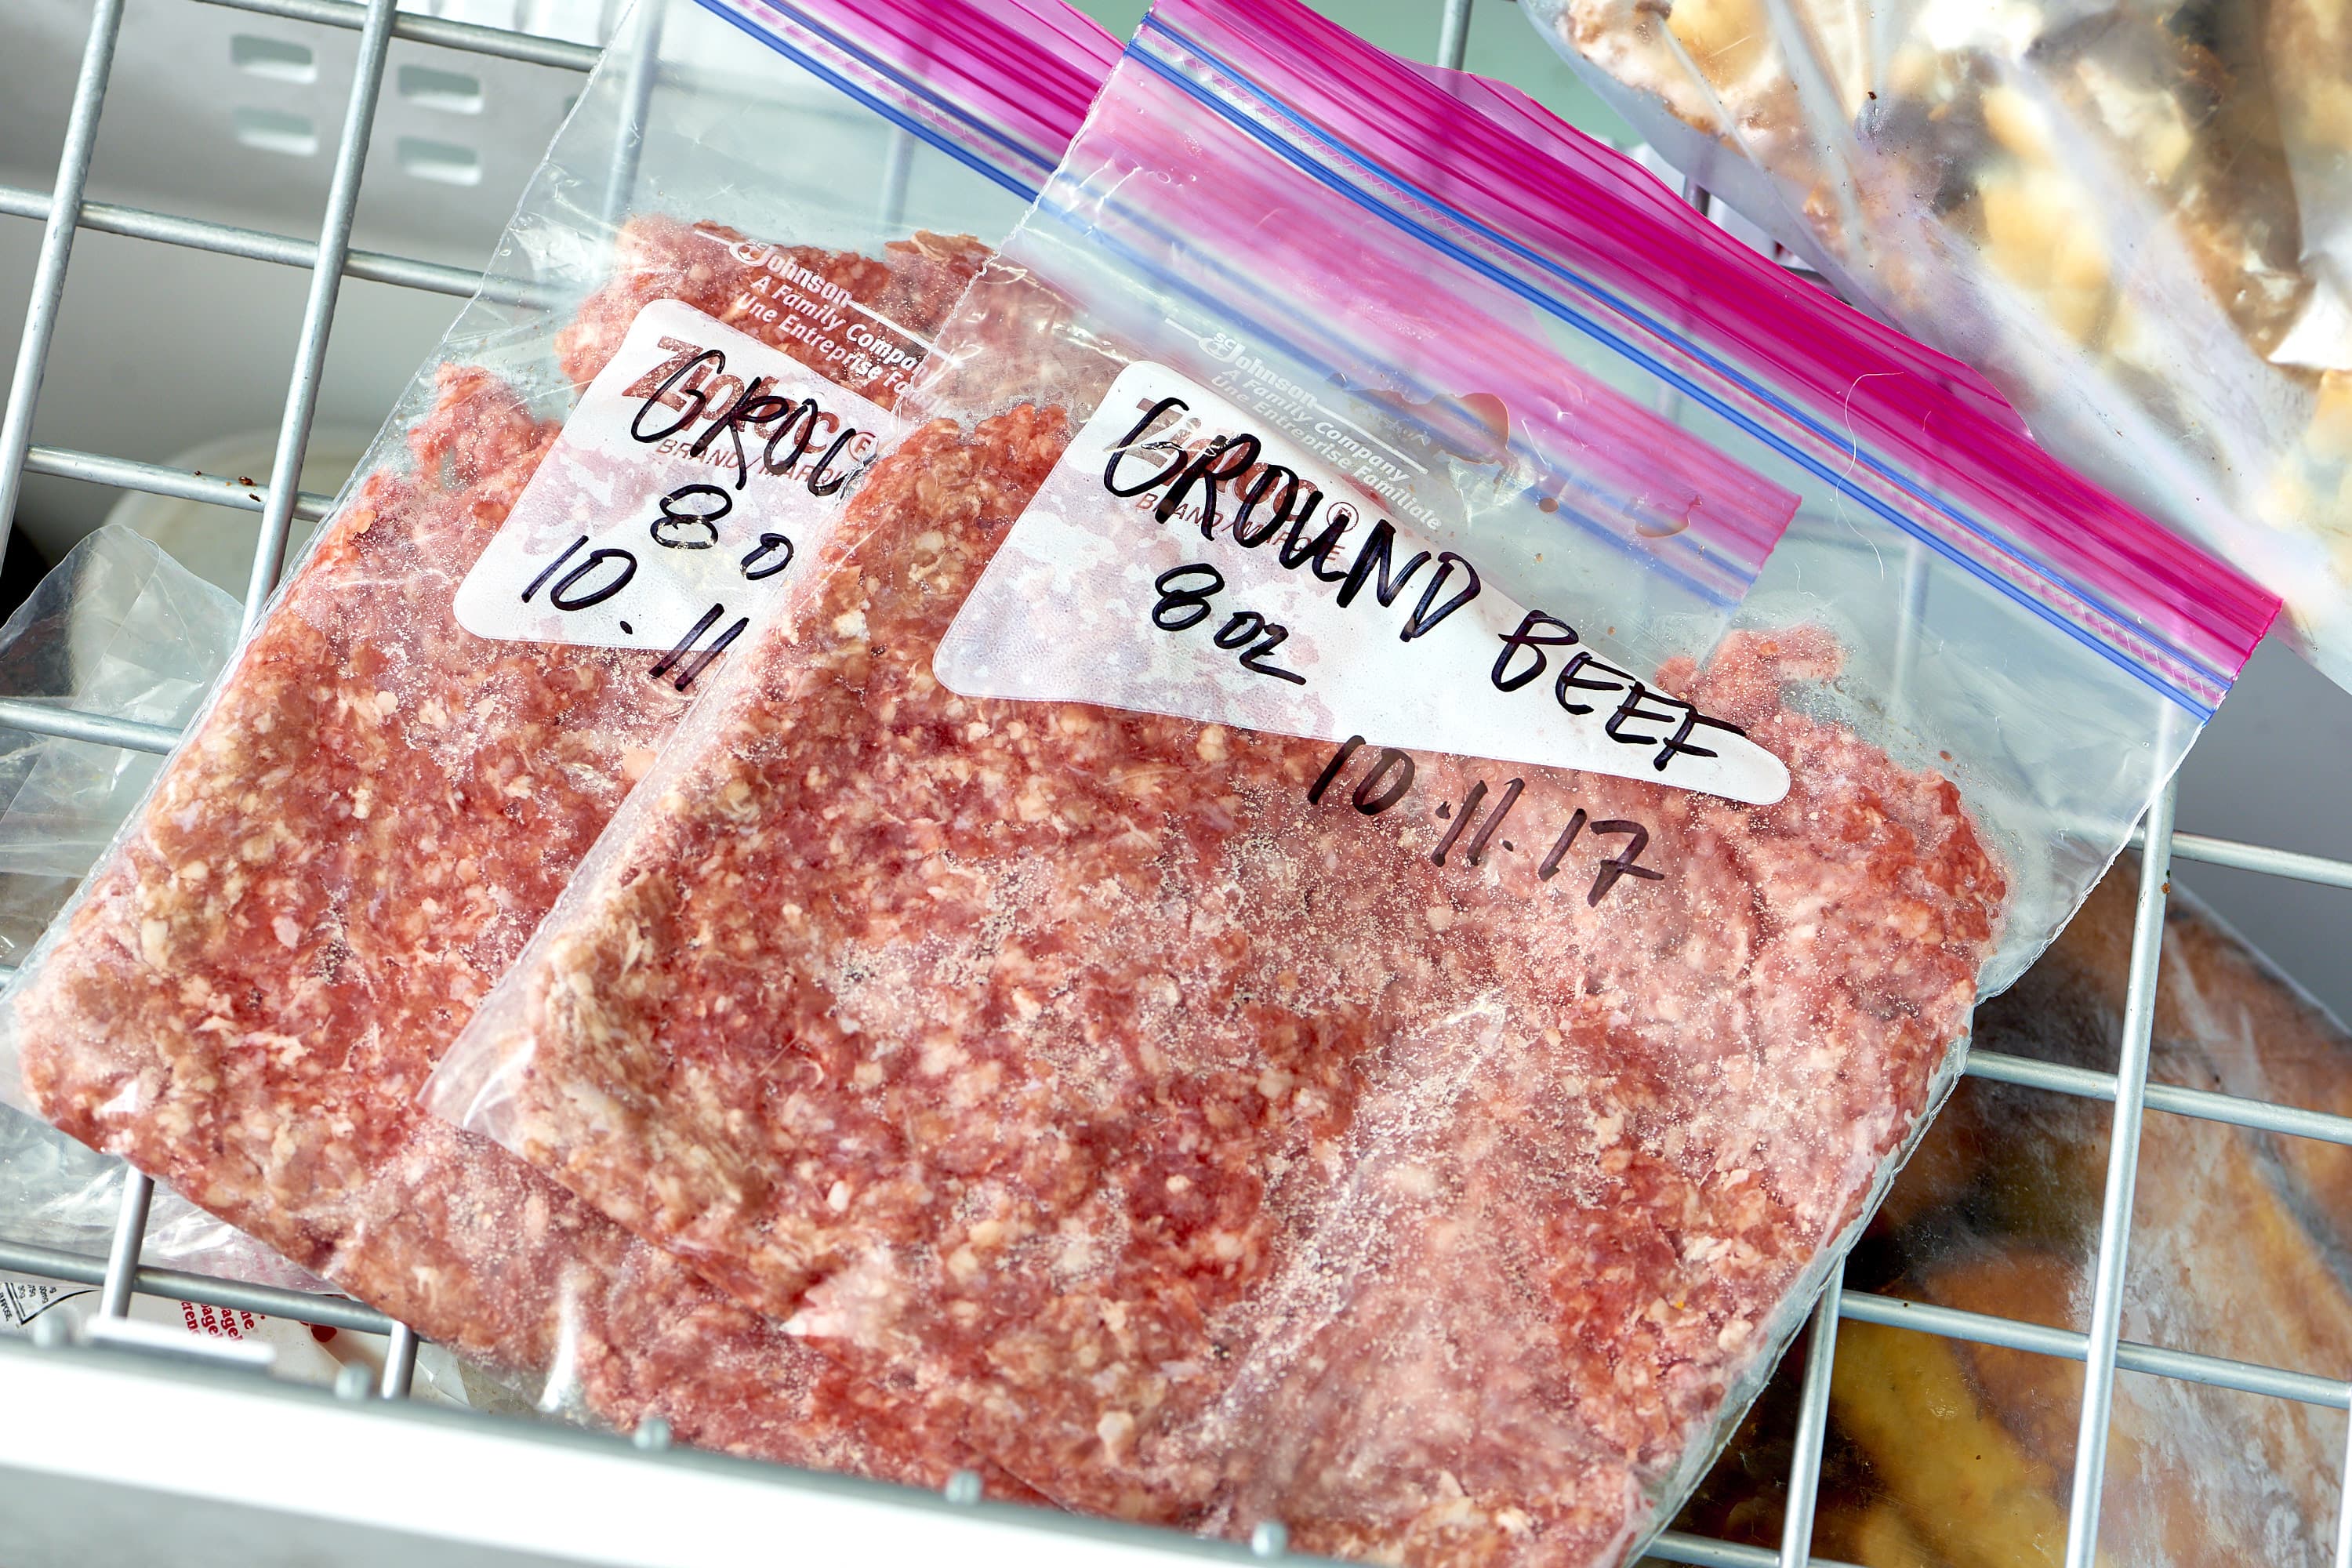 A Beginner's Guide On How To Properly Freeze Different Meats